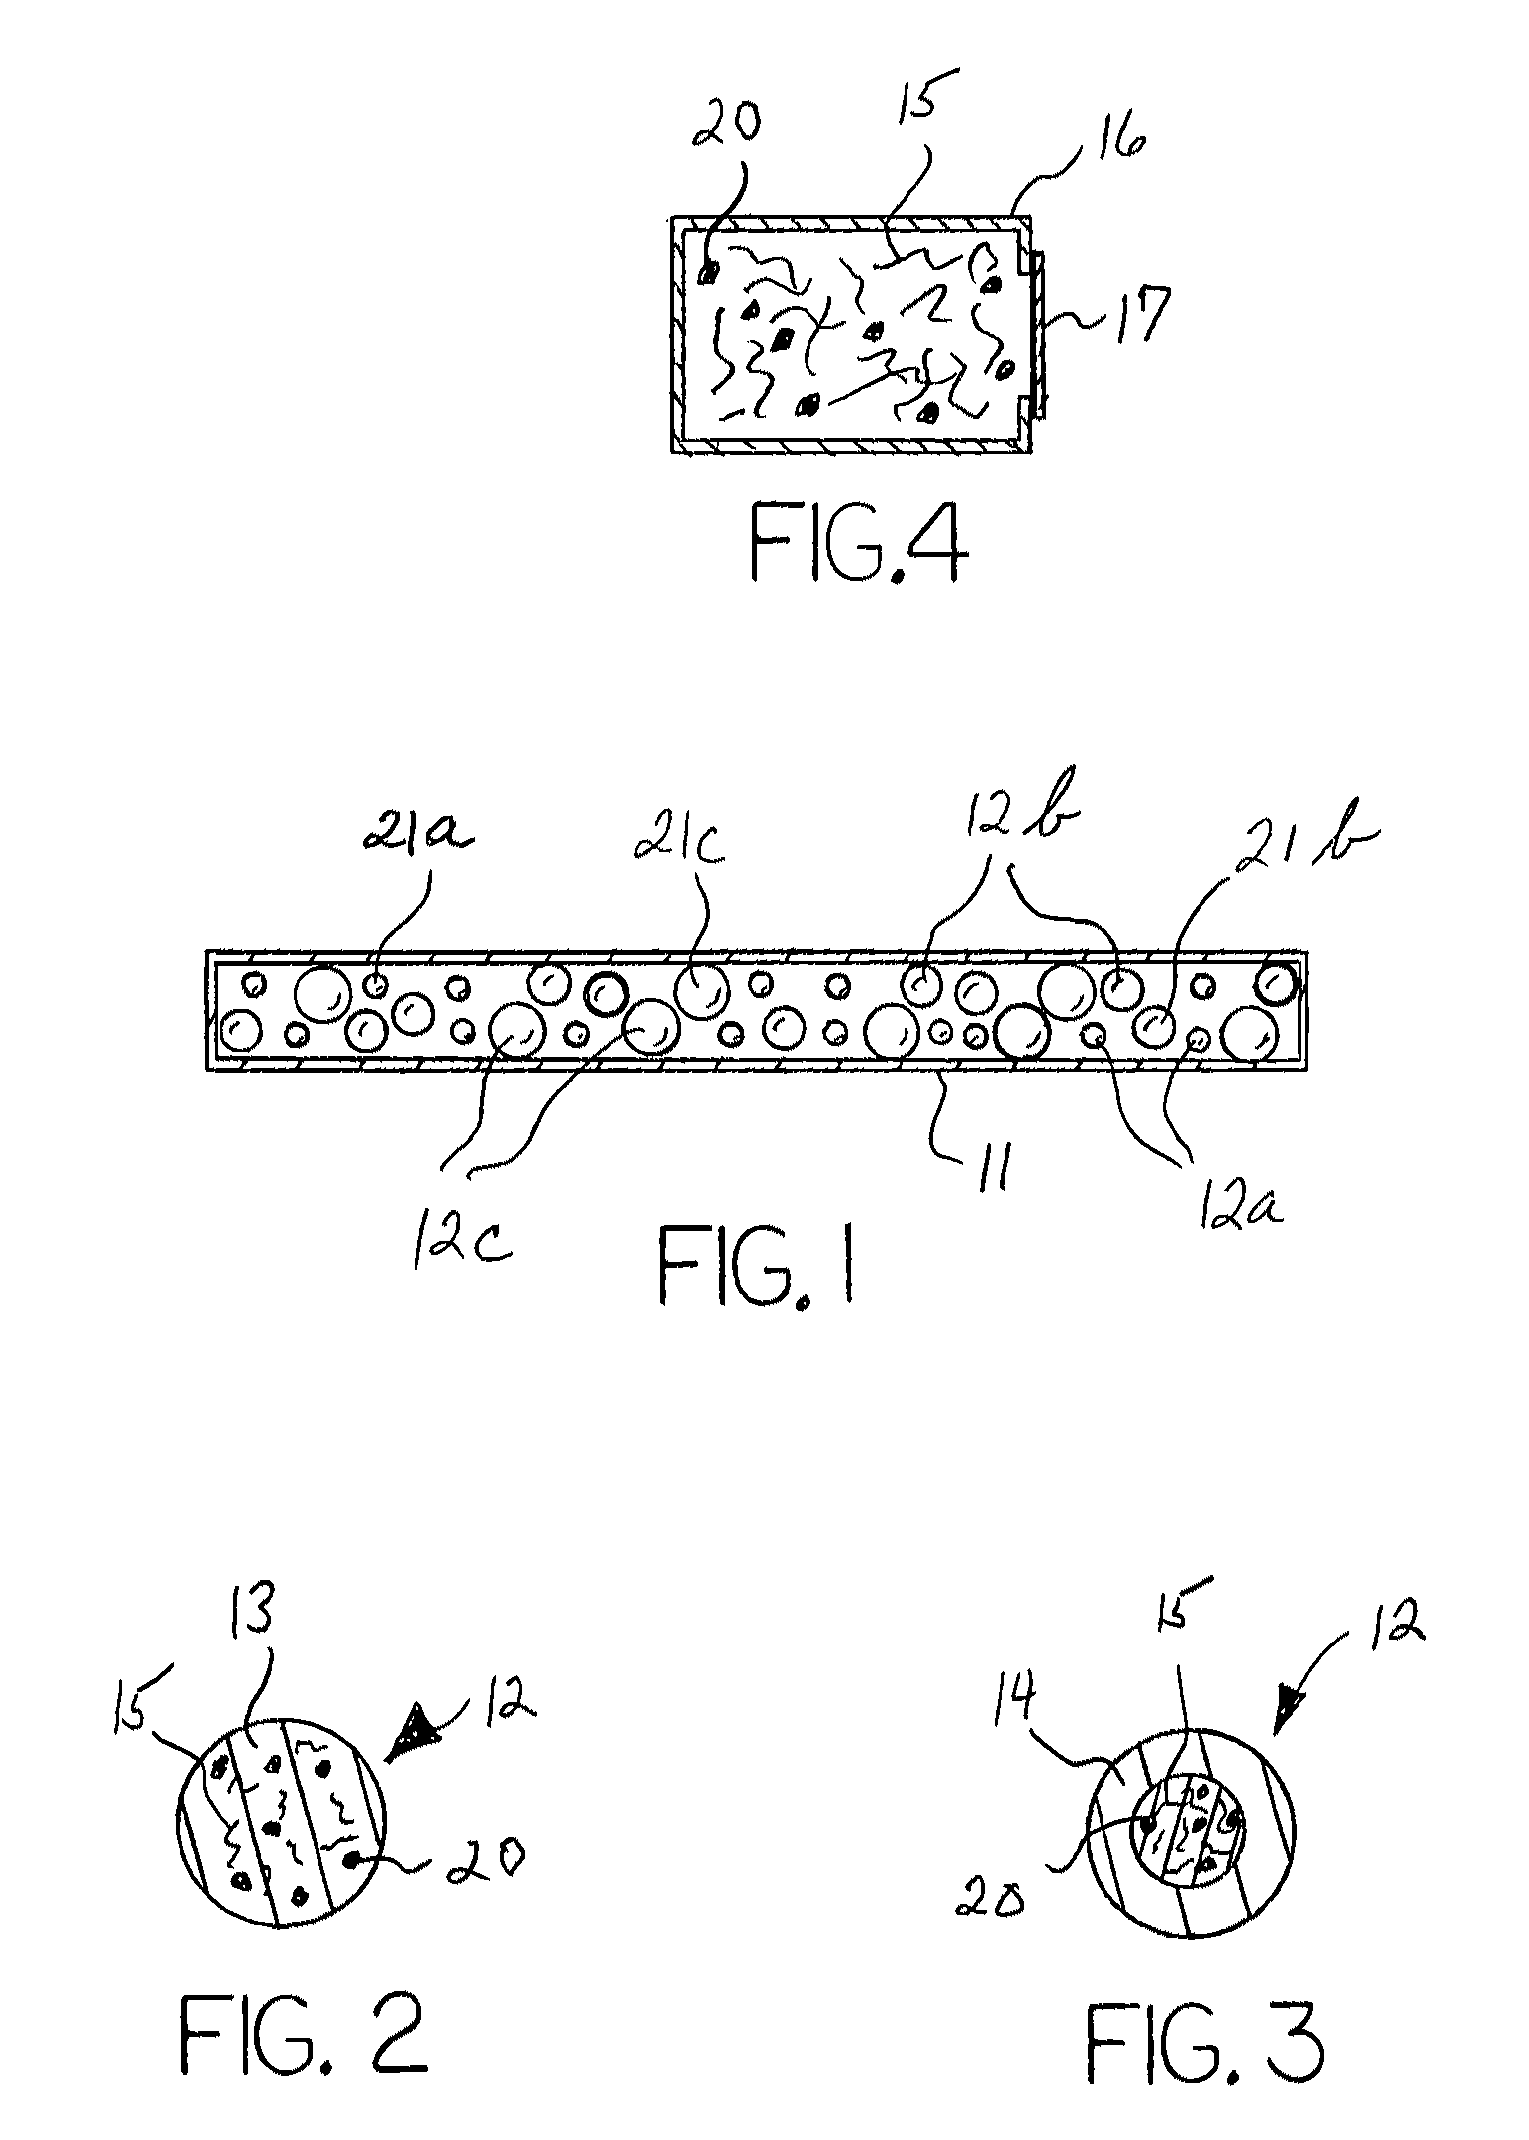 Method of staggered release or exposure of microorganisms for biological remediation of hydrocarbons and other organic matter